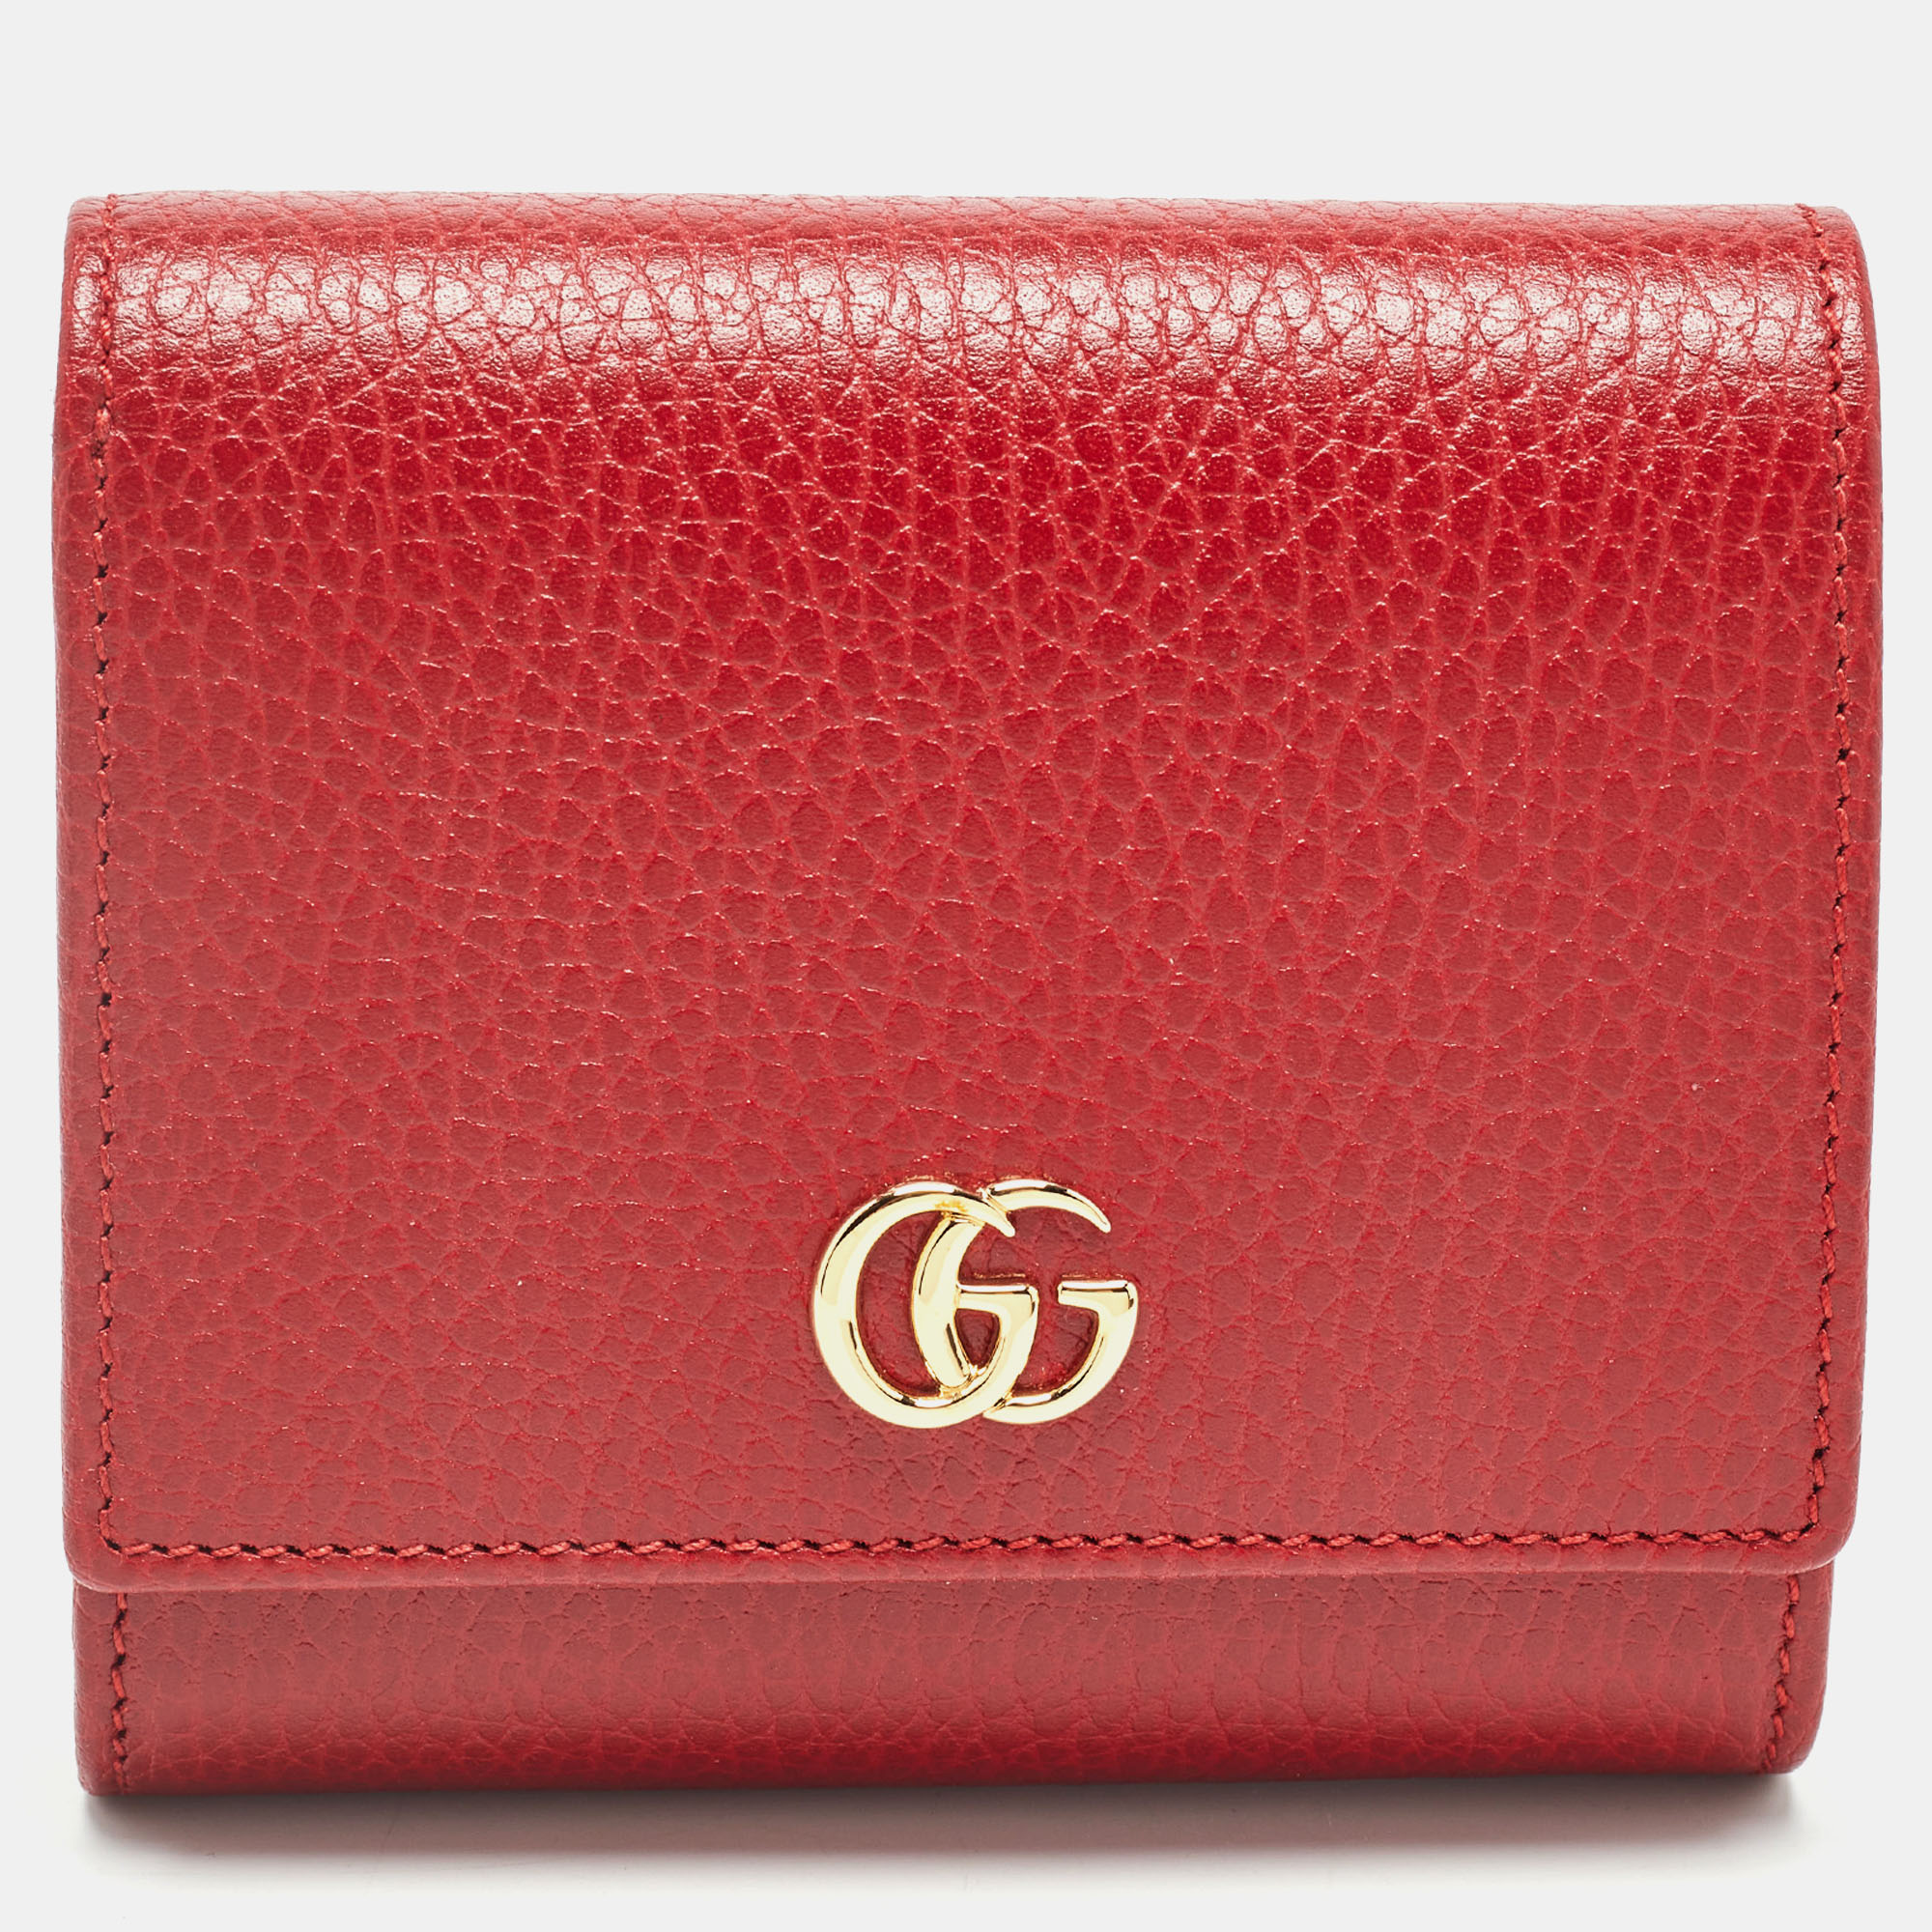 

Gucci Red Leather GG Marmont Trifold Compact Wallet